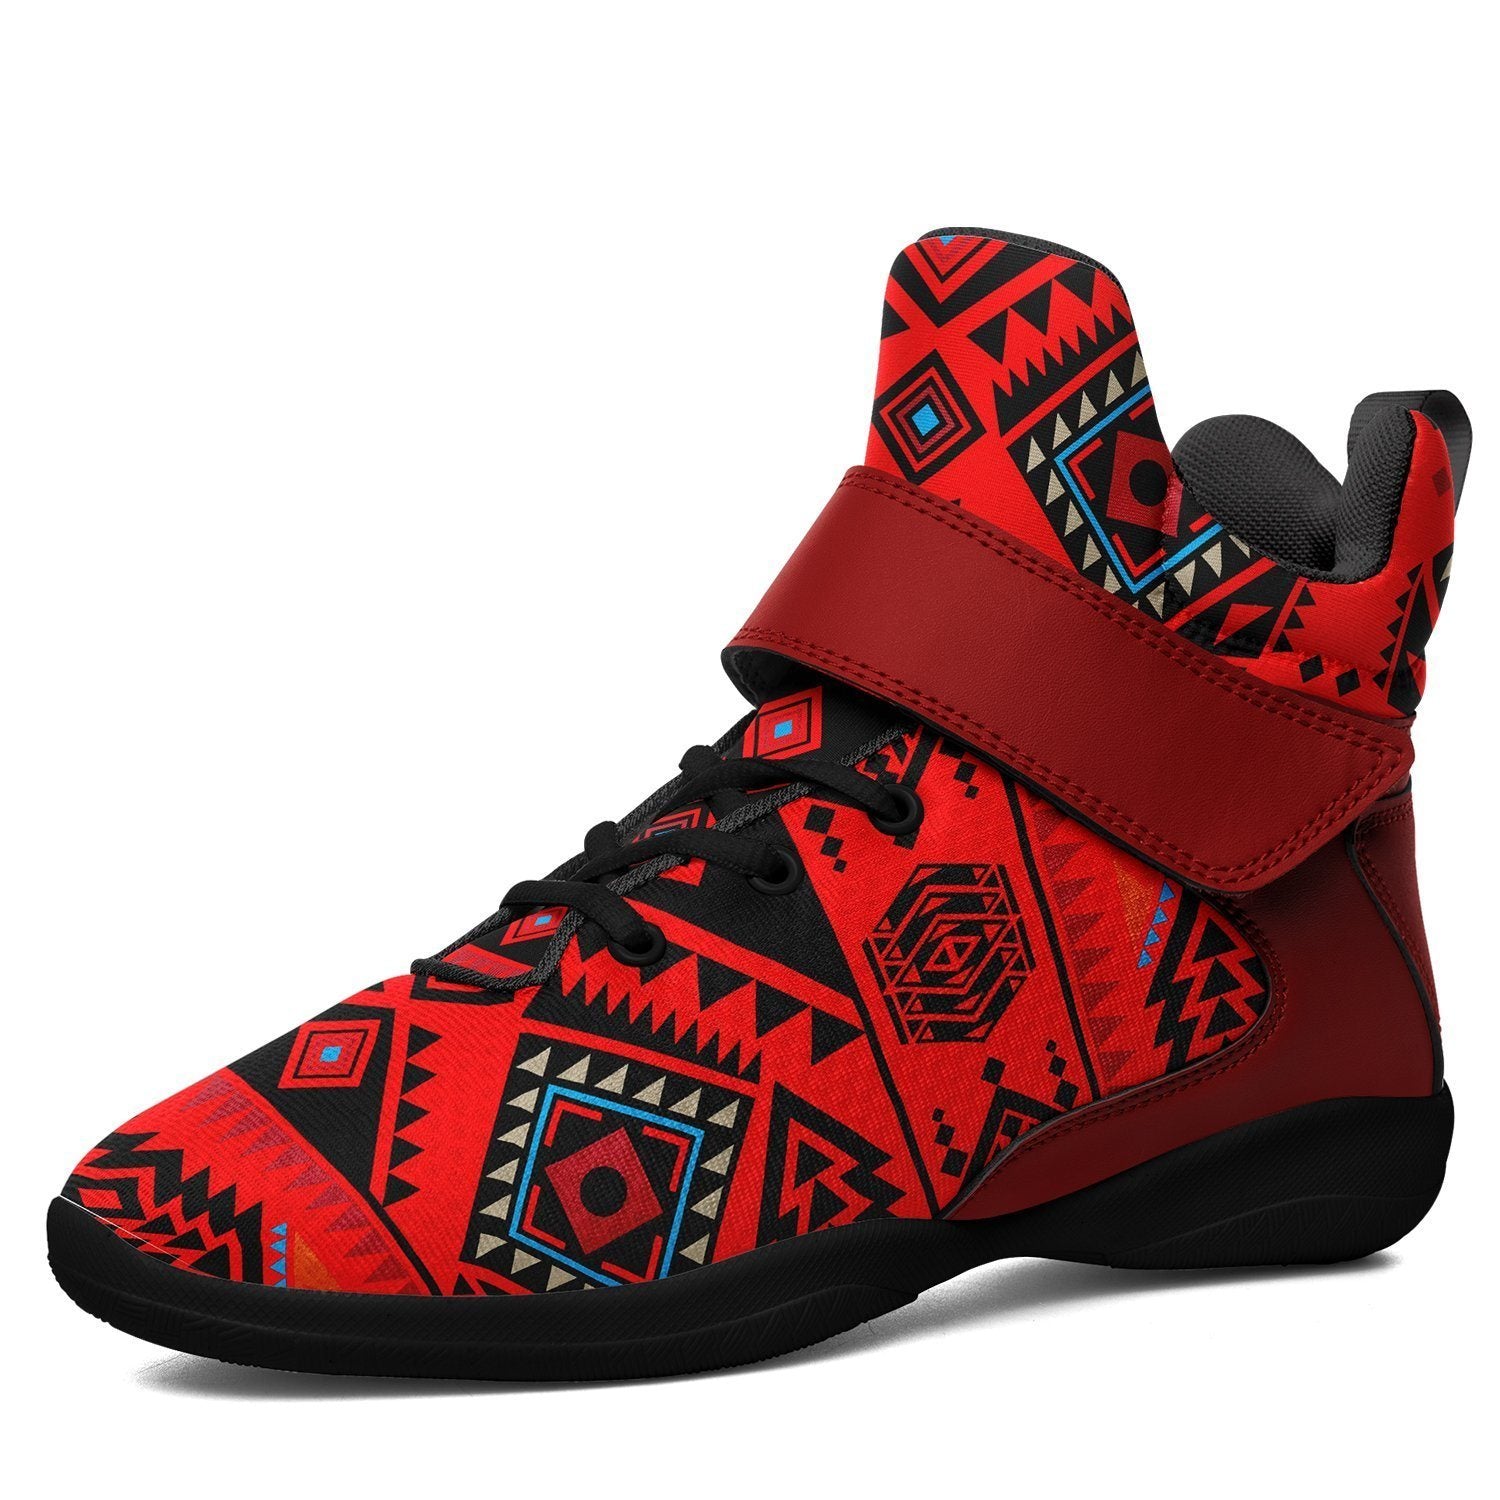 California Coast Mask Kid's Ipottaa Basketball / Sport High Top Shoes 49 Dzine US Women 4.5 / US Youth 3.5 / EUR 35 Black Sole with Dark Red Strap 